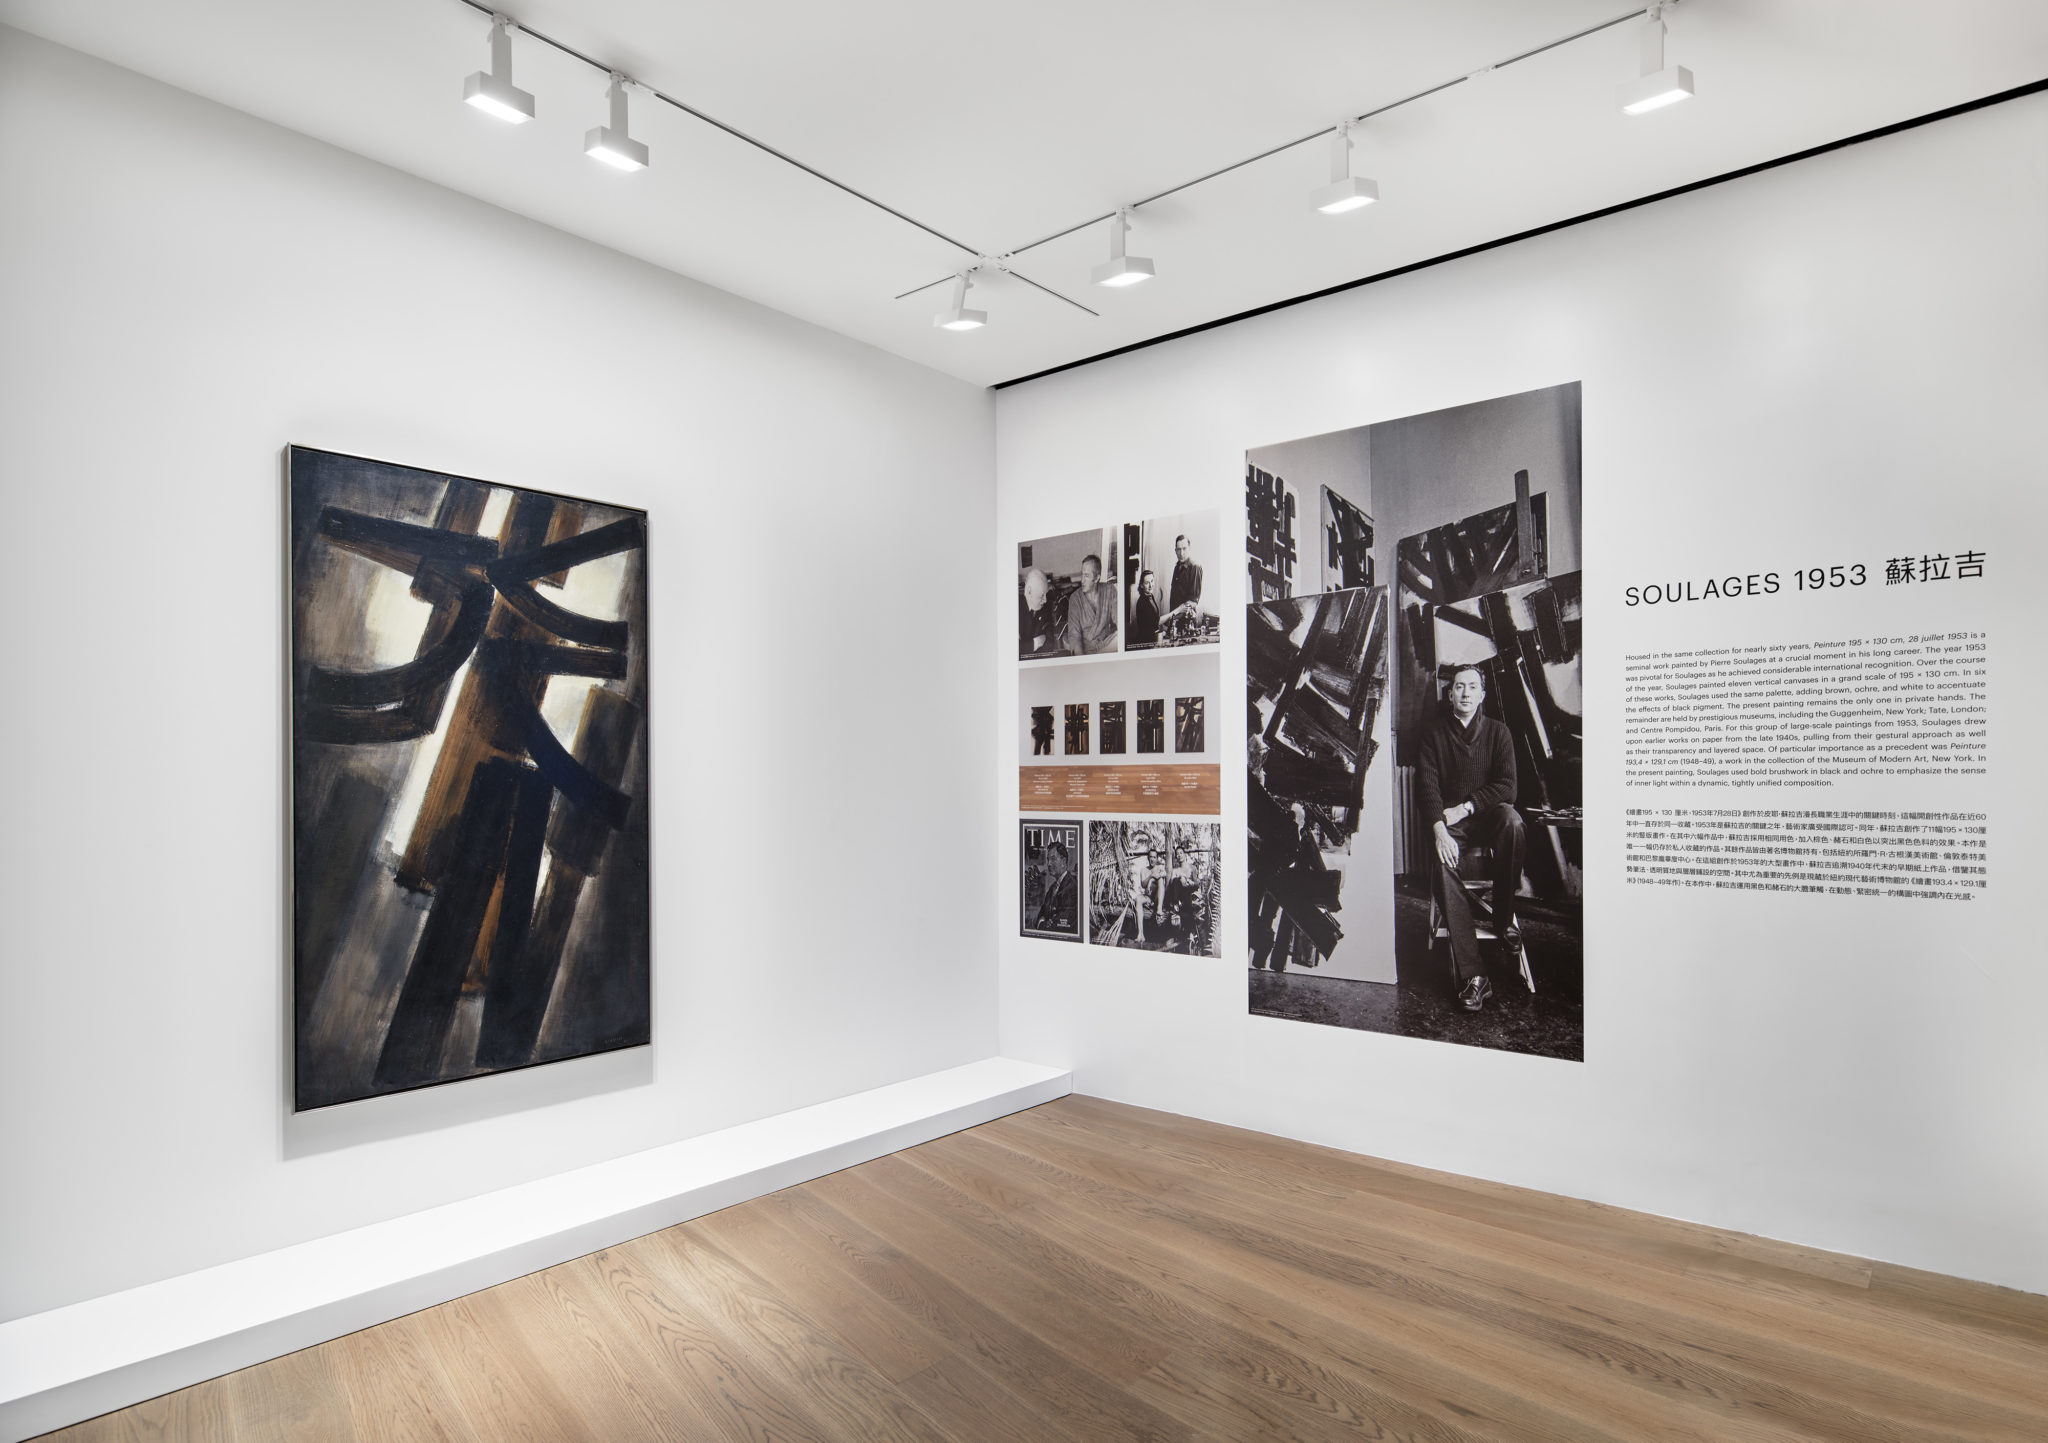 Installation view of Pierre Soulages: Outrenoir exhibition at Lévy Gorvy Hong Kong 2020